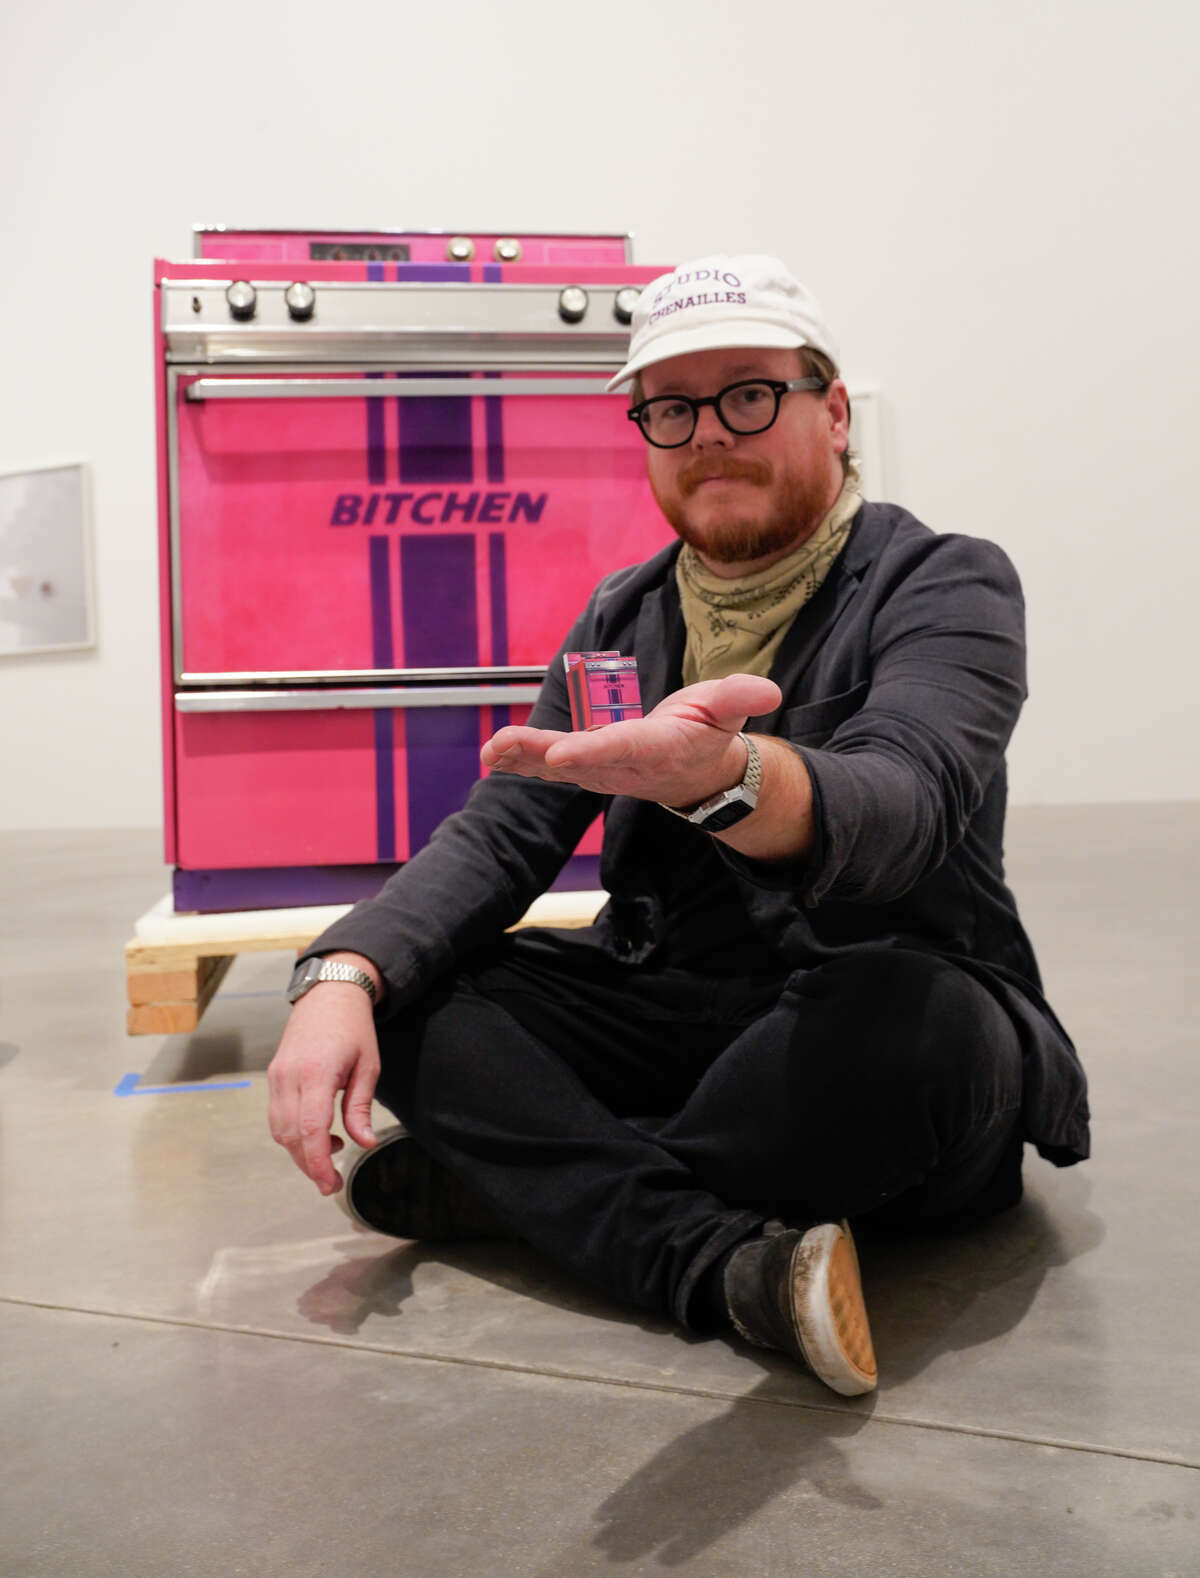 Jeremiah Teutsch made tiny models of works in Ruby City's new exhibit "Tangible/Nothing," including San Antonio artist Katie Pell's "Bitchen Stove."  